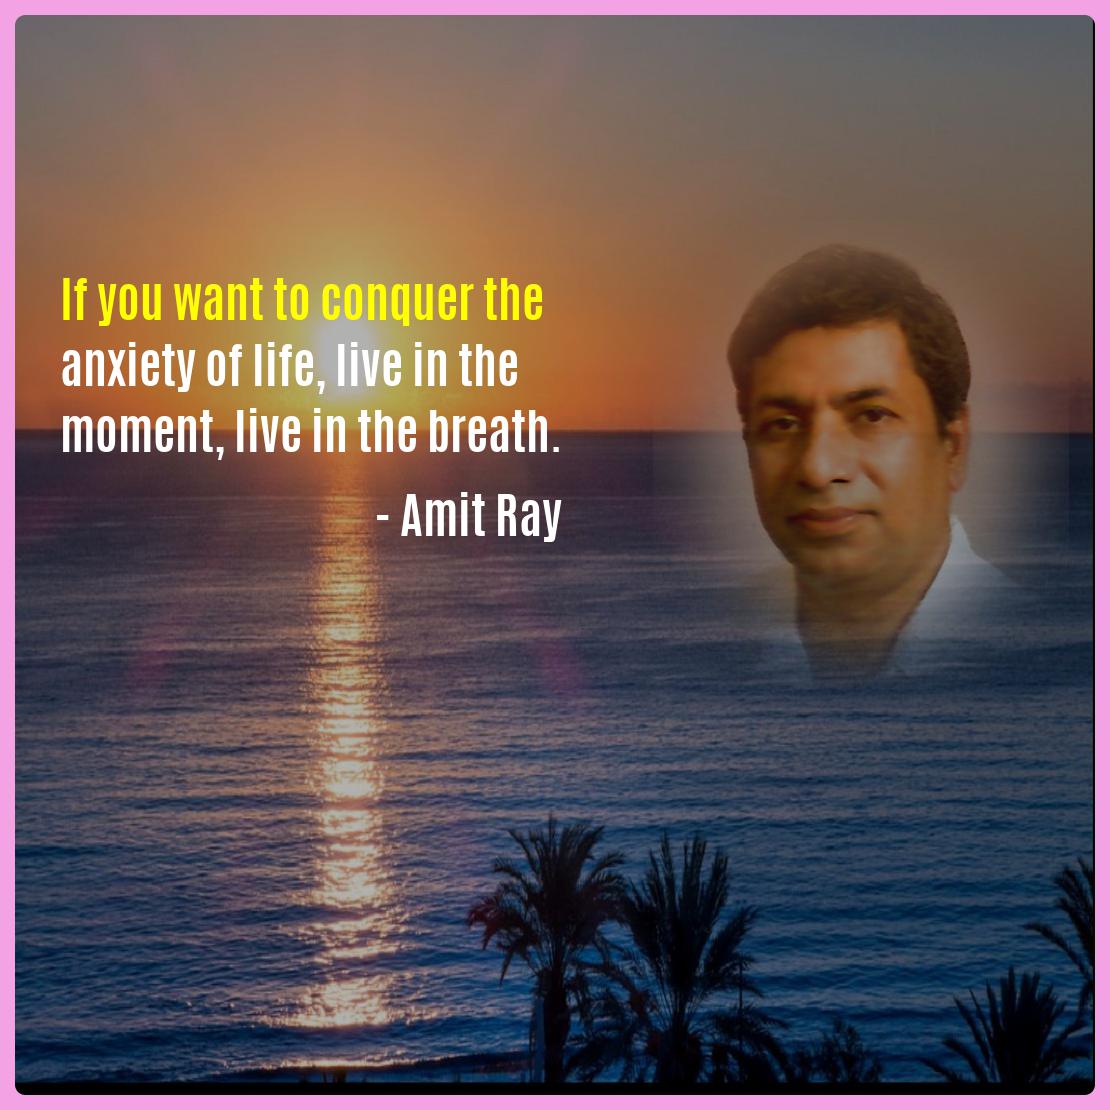 If you want to conquer the anxiety of life, live in the moment, live in the breath. -- Amit Ray 